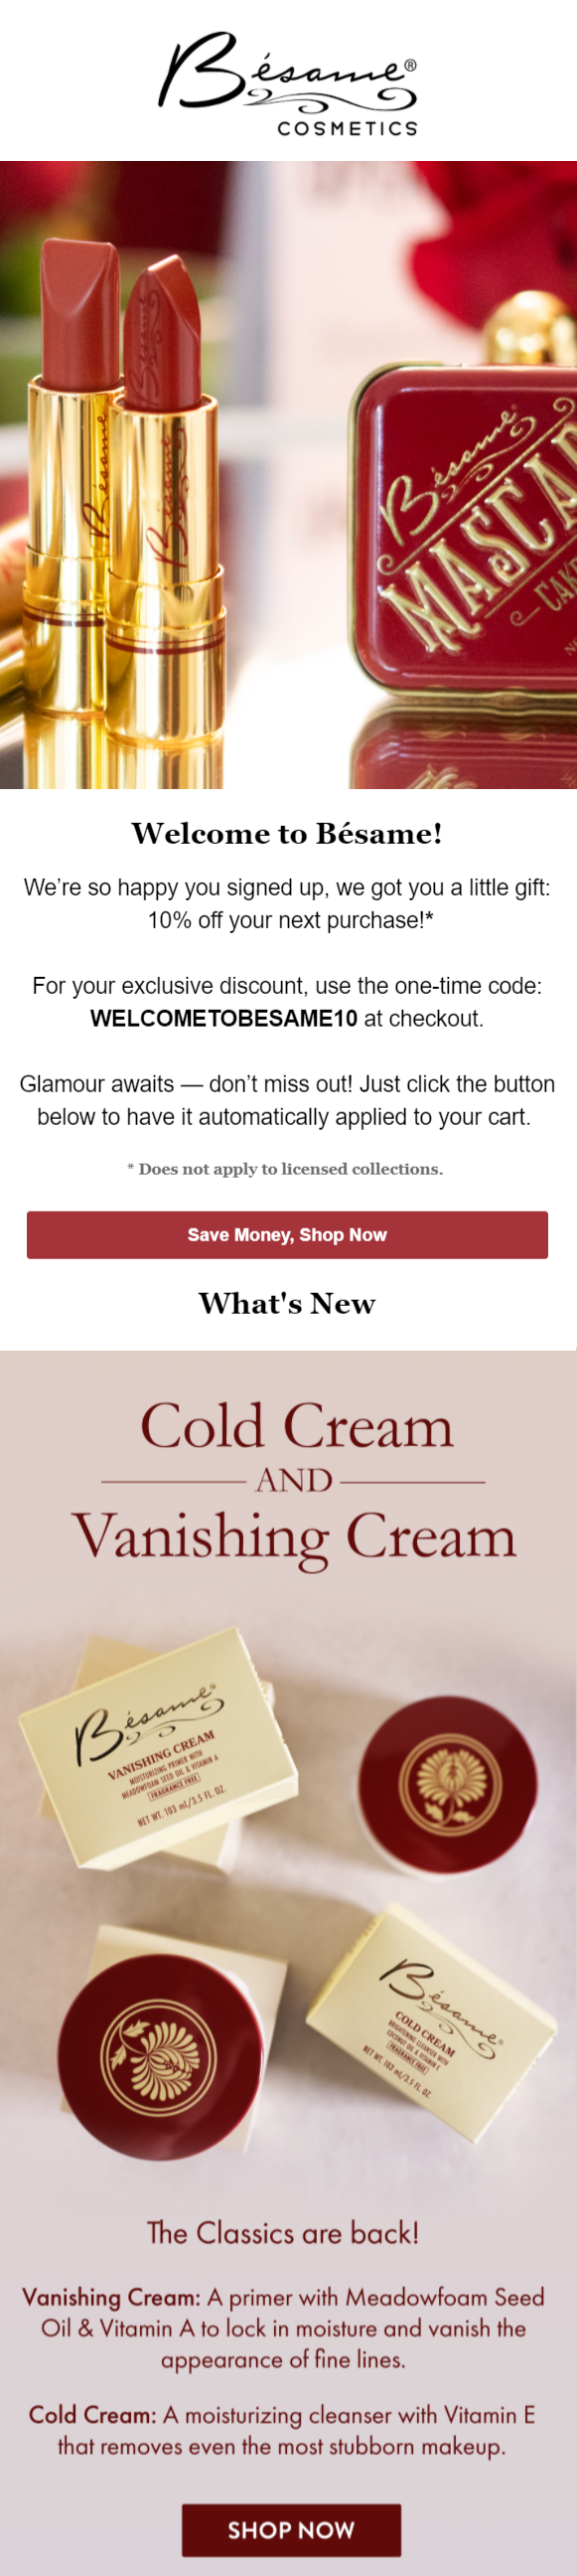 besame cosmetic welcome email marketing campaign example